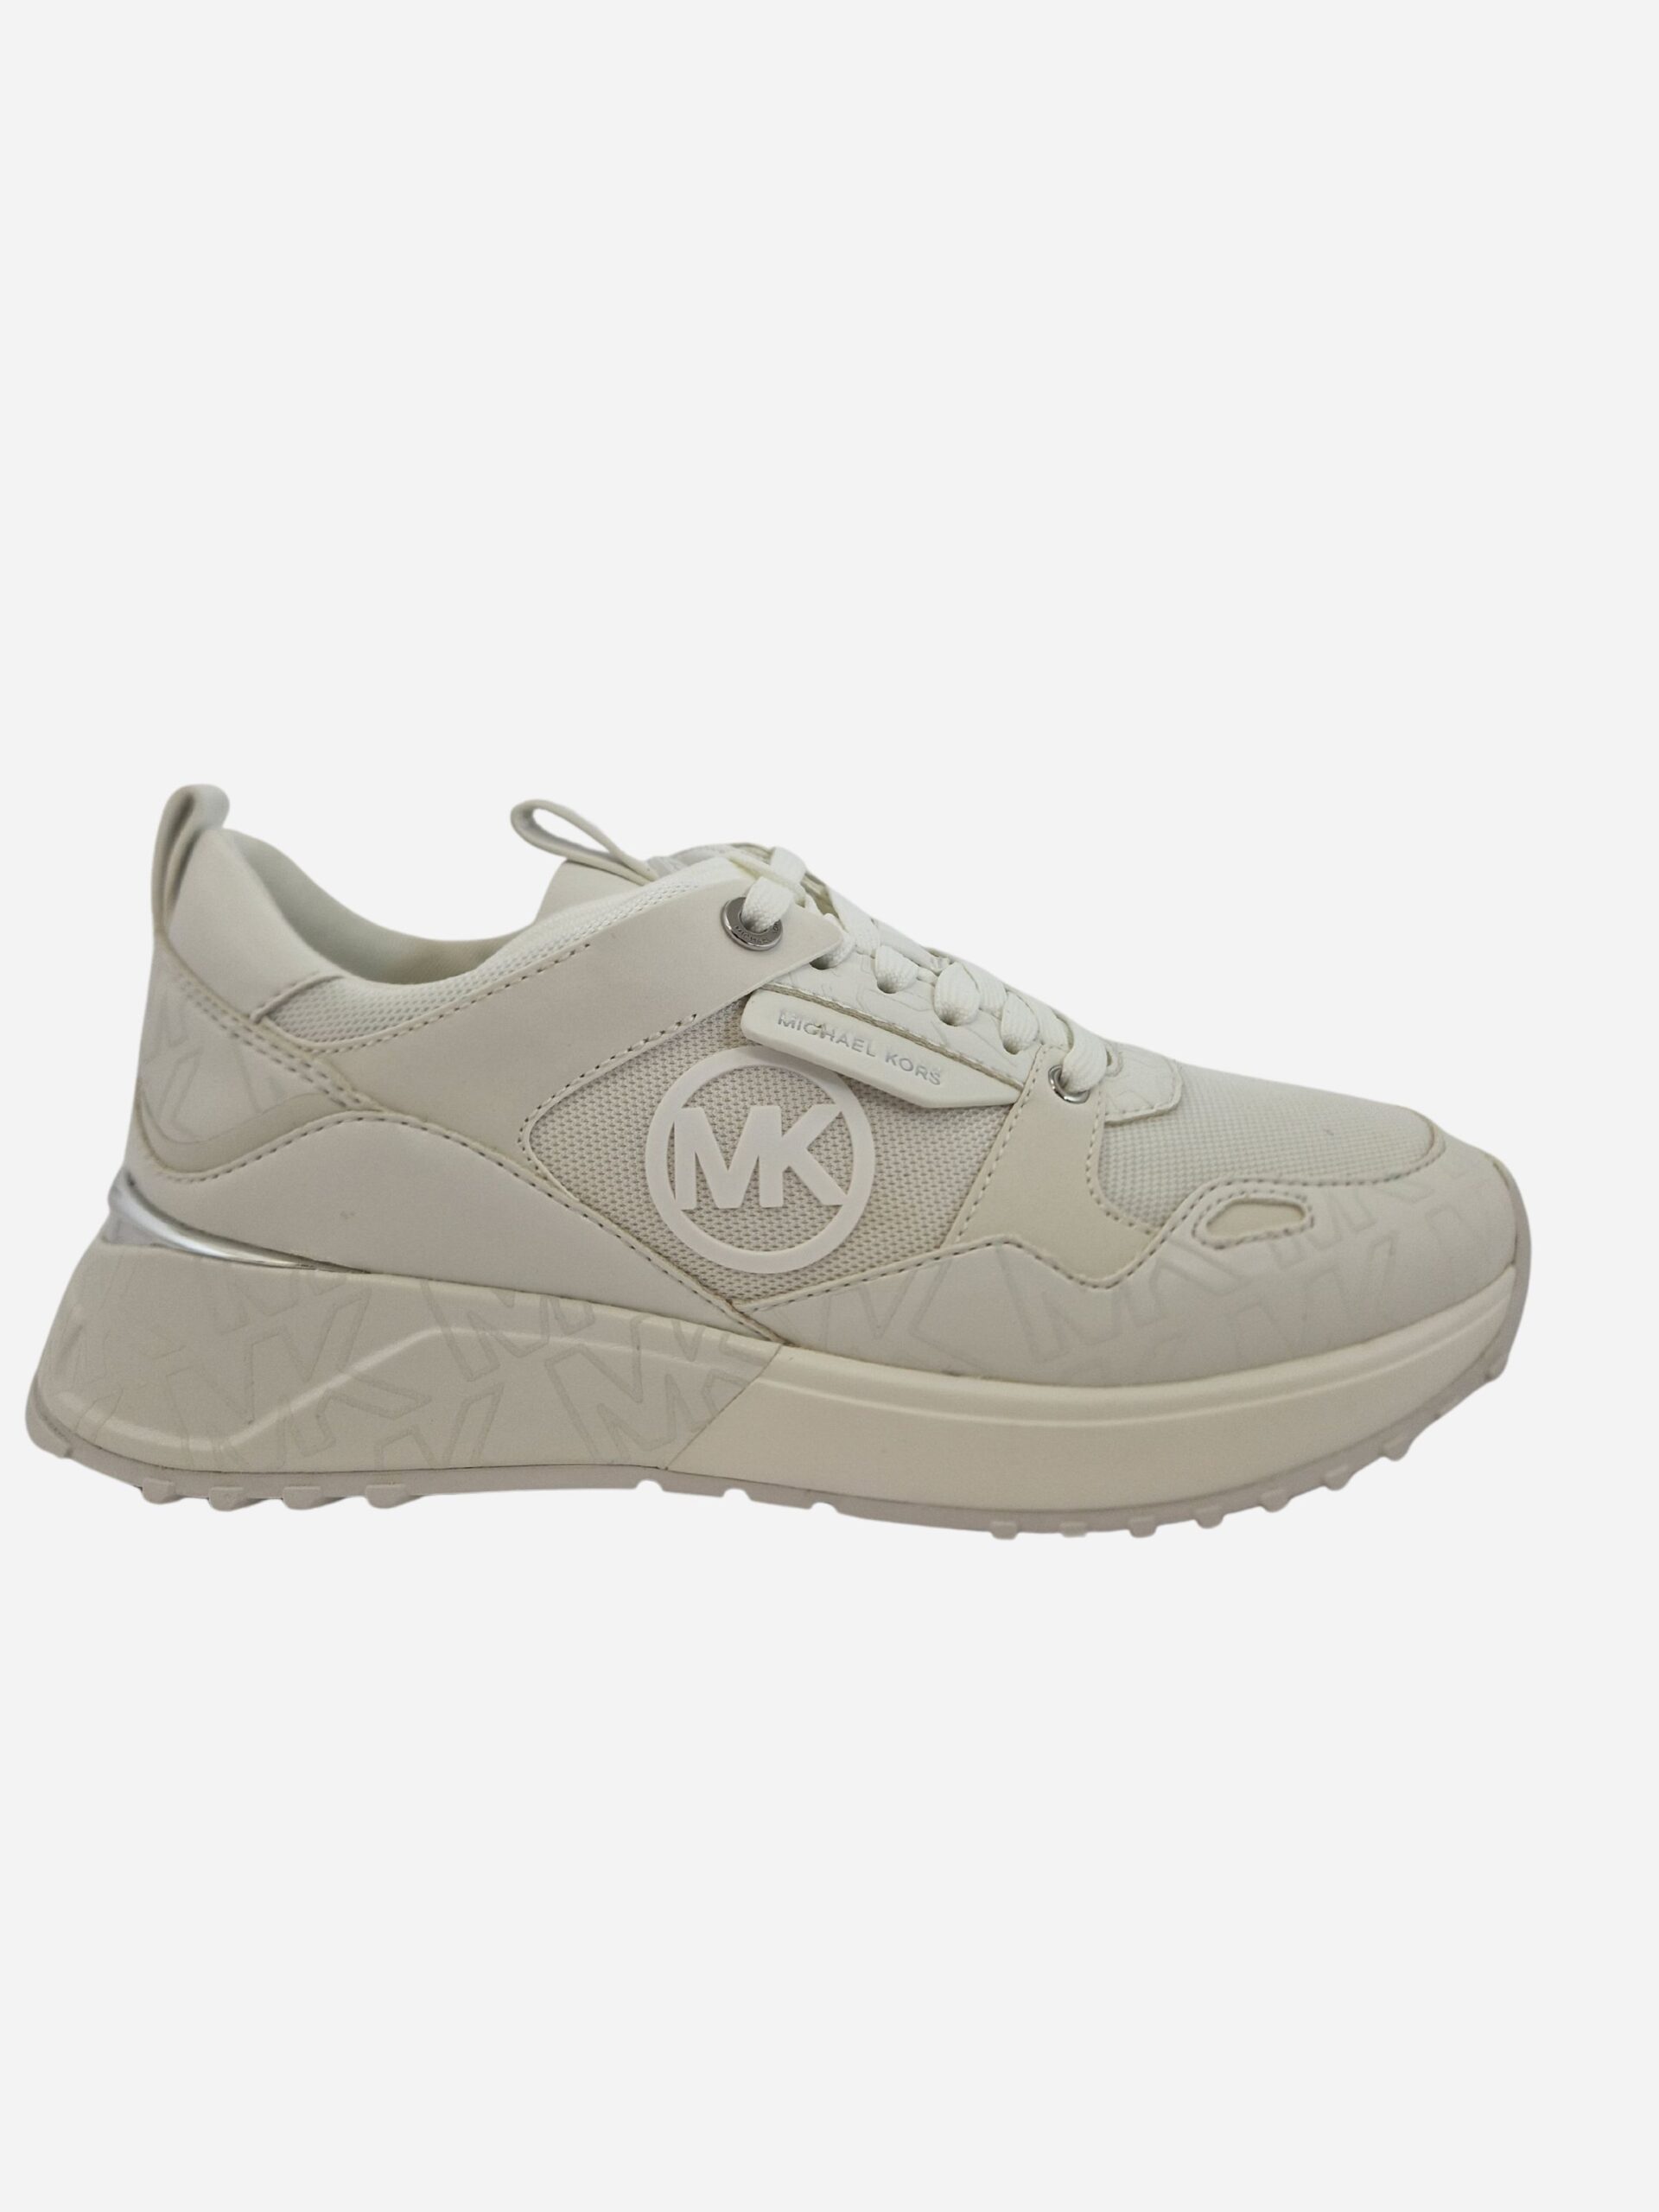 sneakers bianche theo trainer michael kors